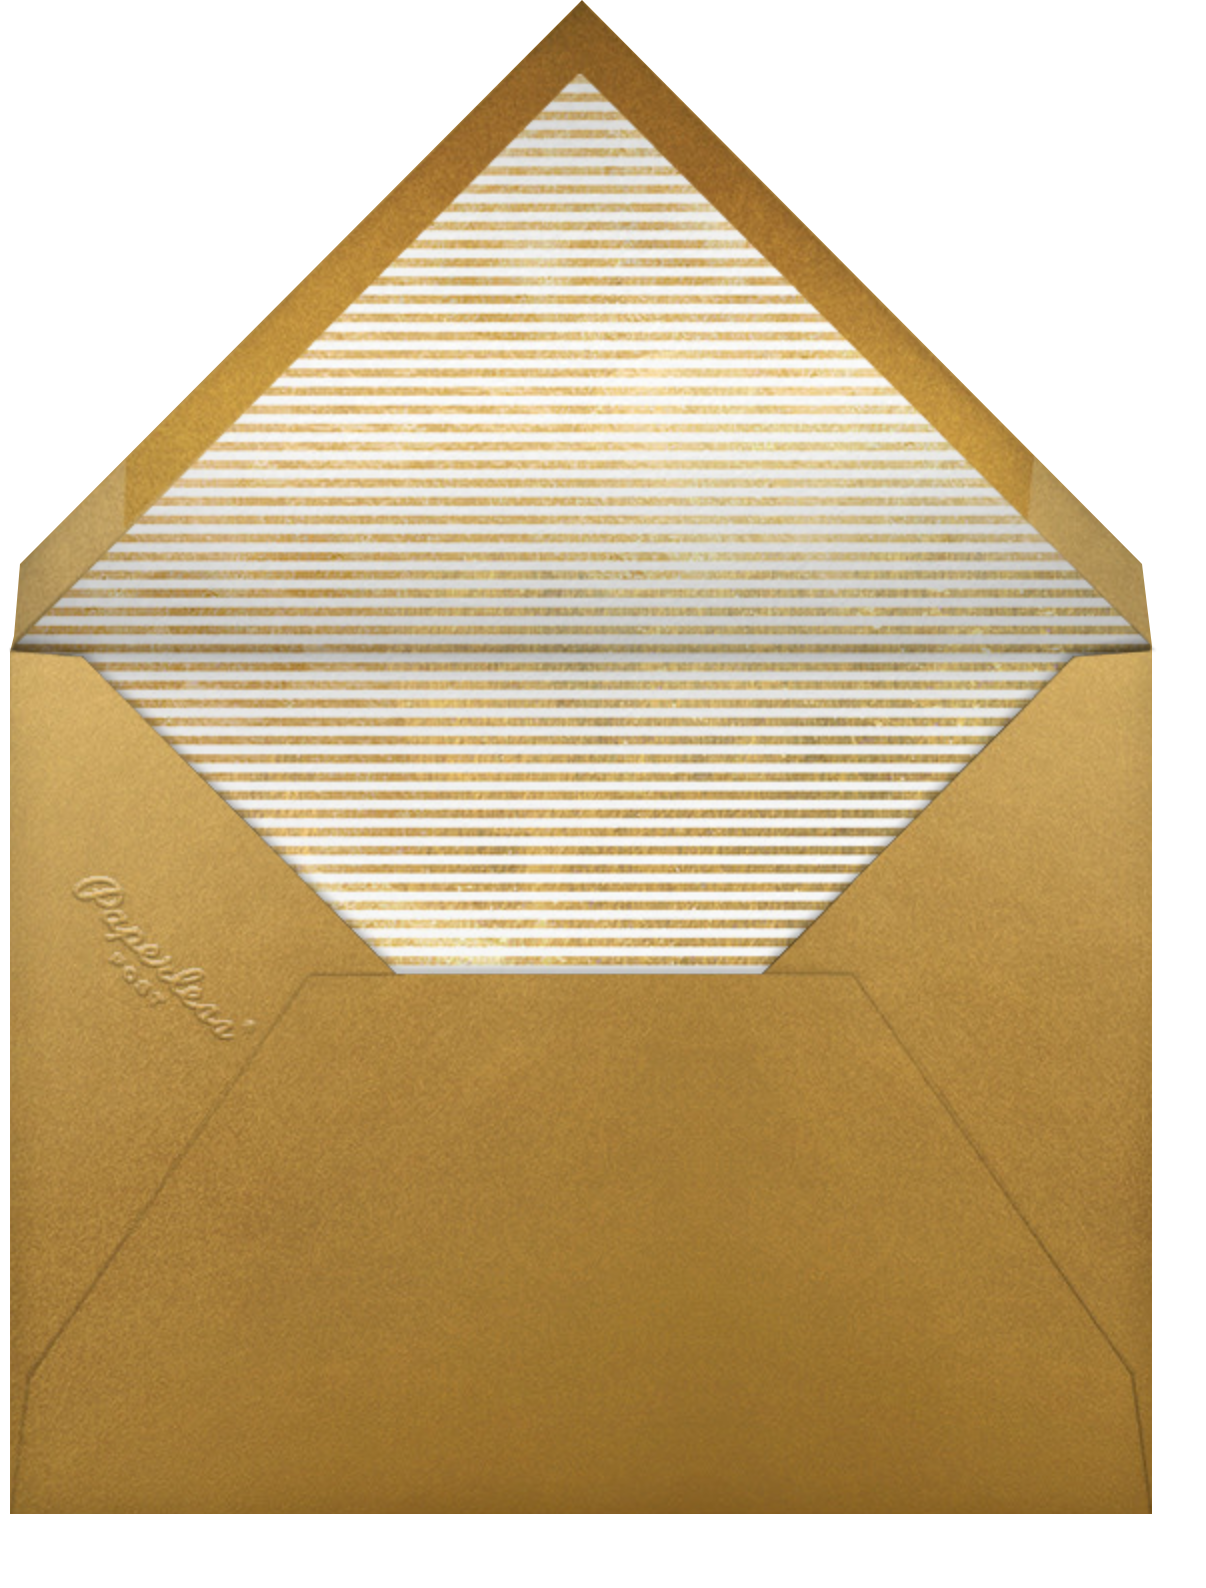 Snapshot Gold (Double Sided) - Square - Paperless Post - Envelope